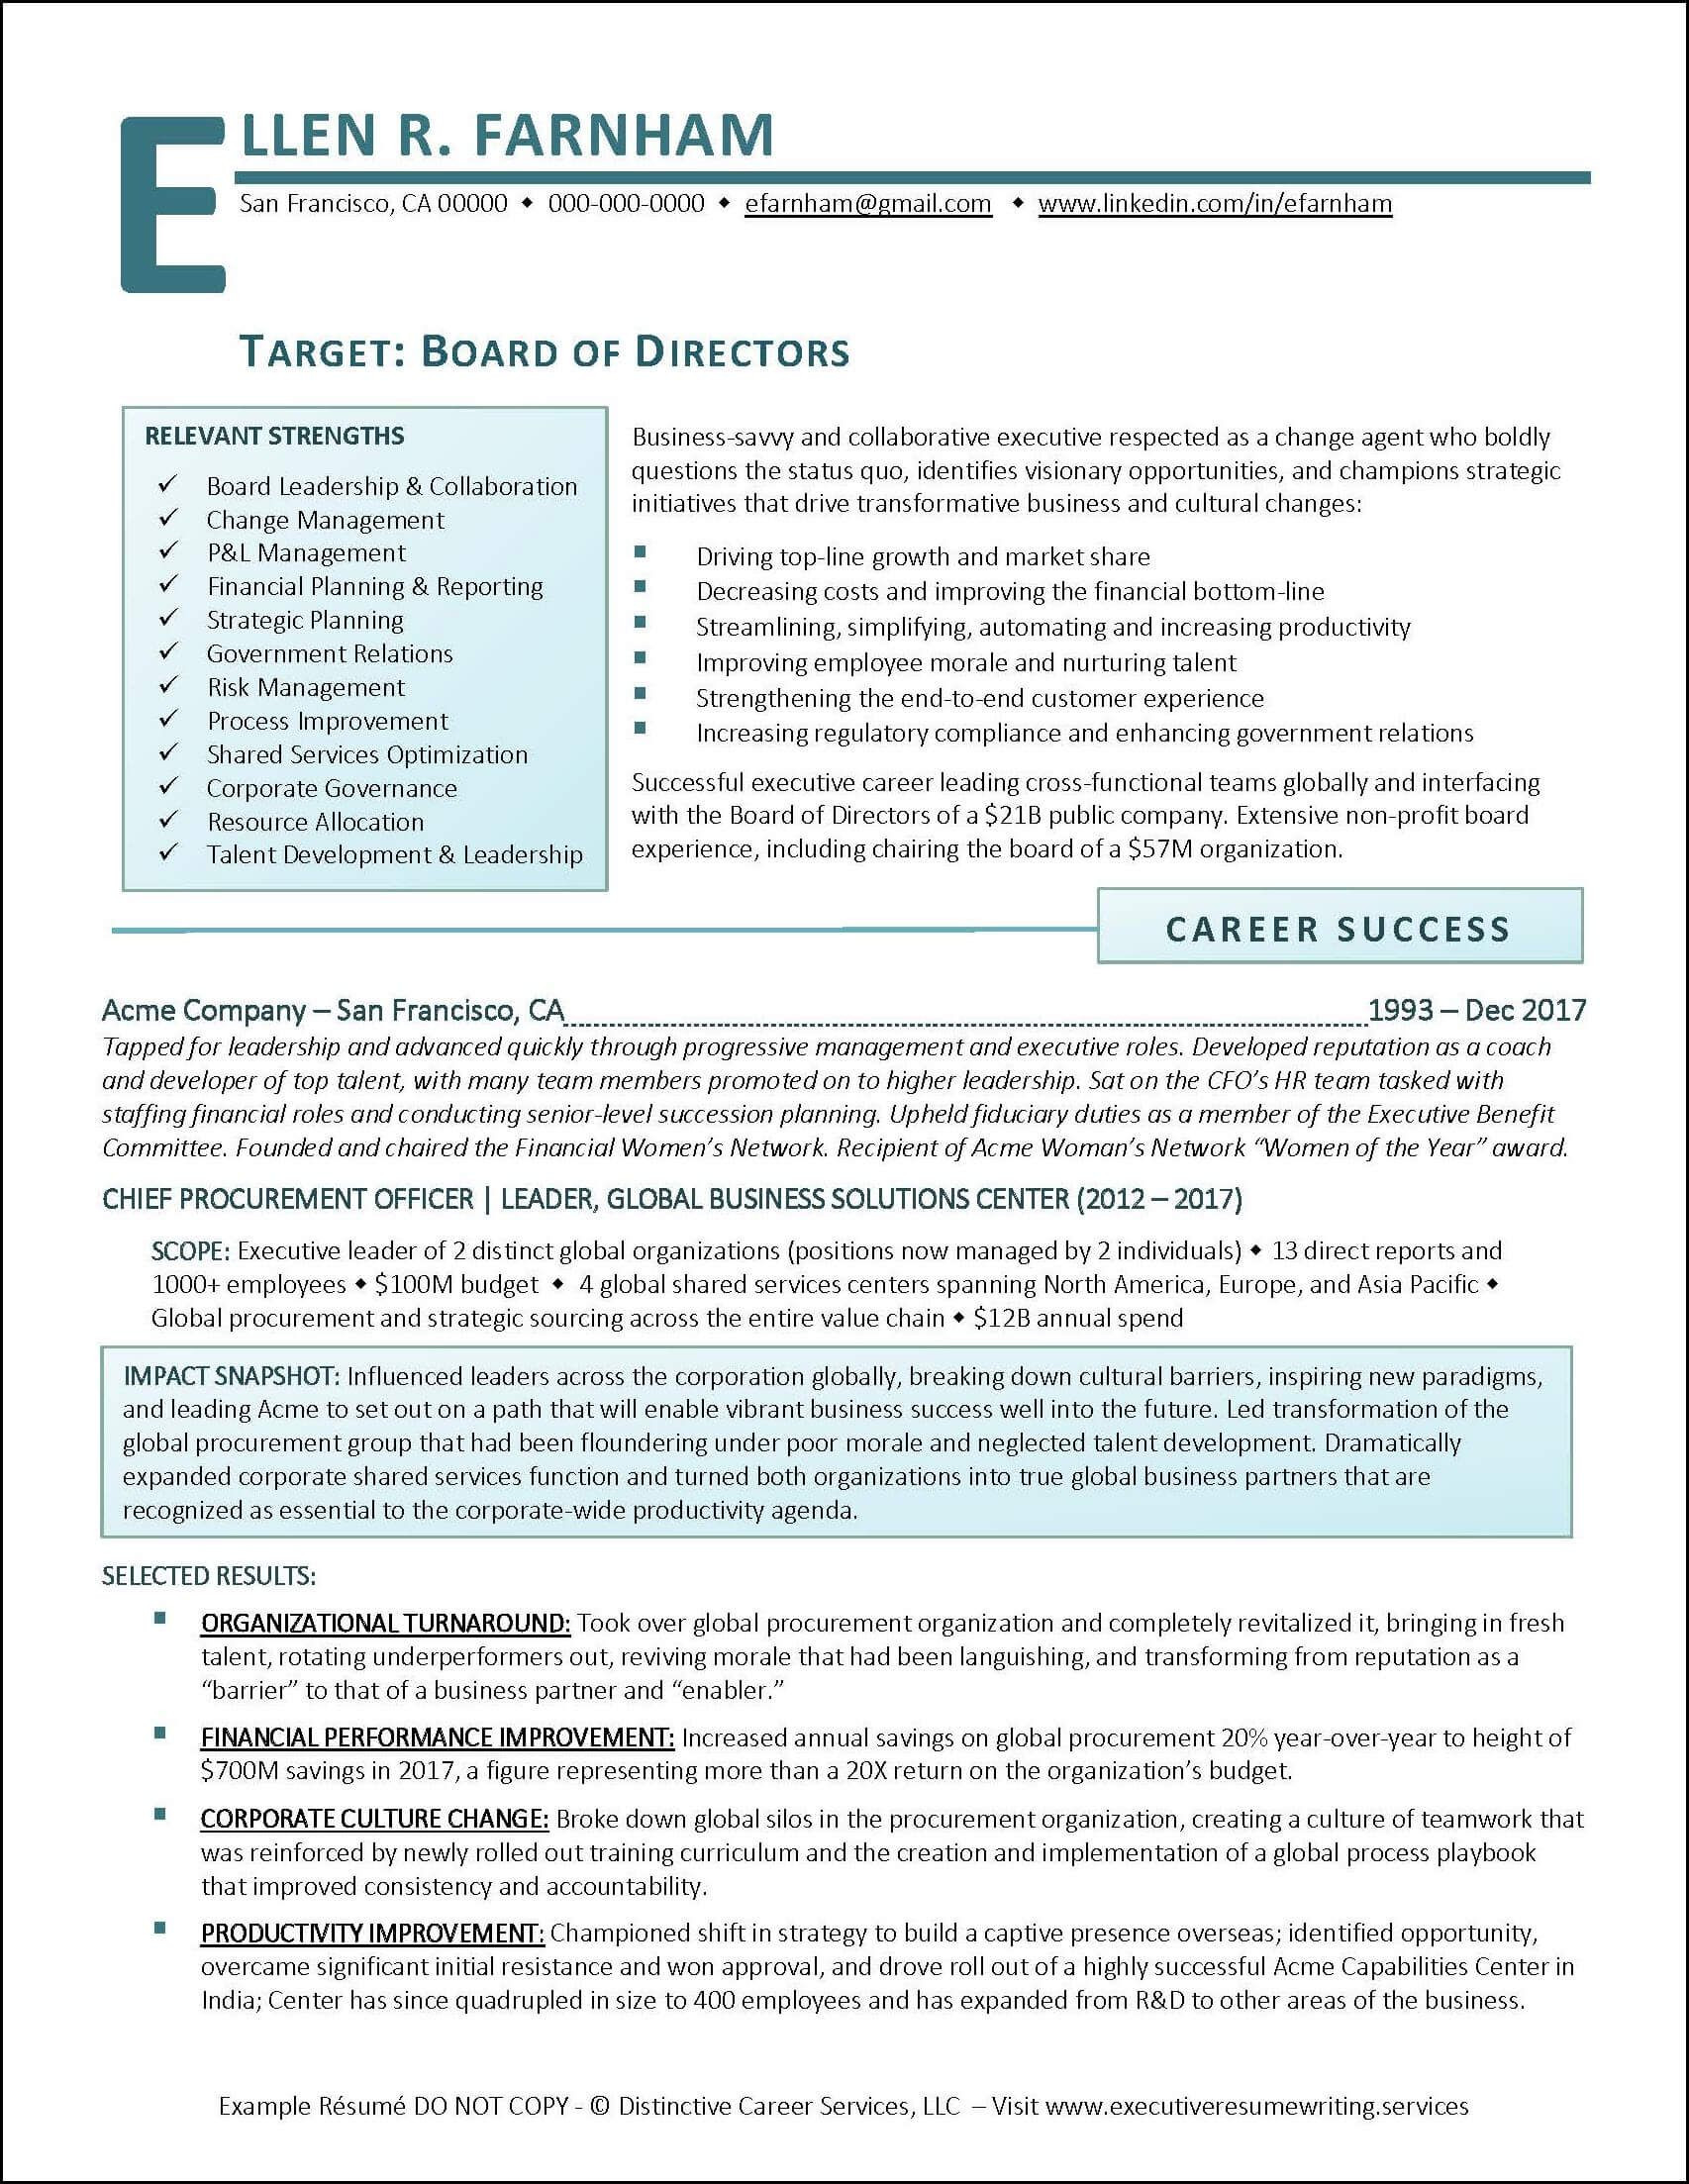 Sample Resume with Board Member Experience Example Board Of Directors Executive Resume Pg 1 Executive …